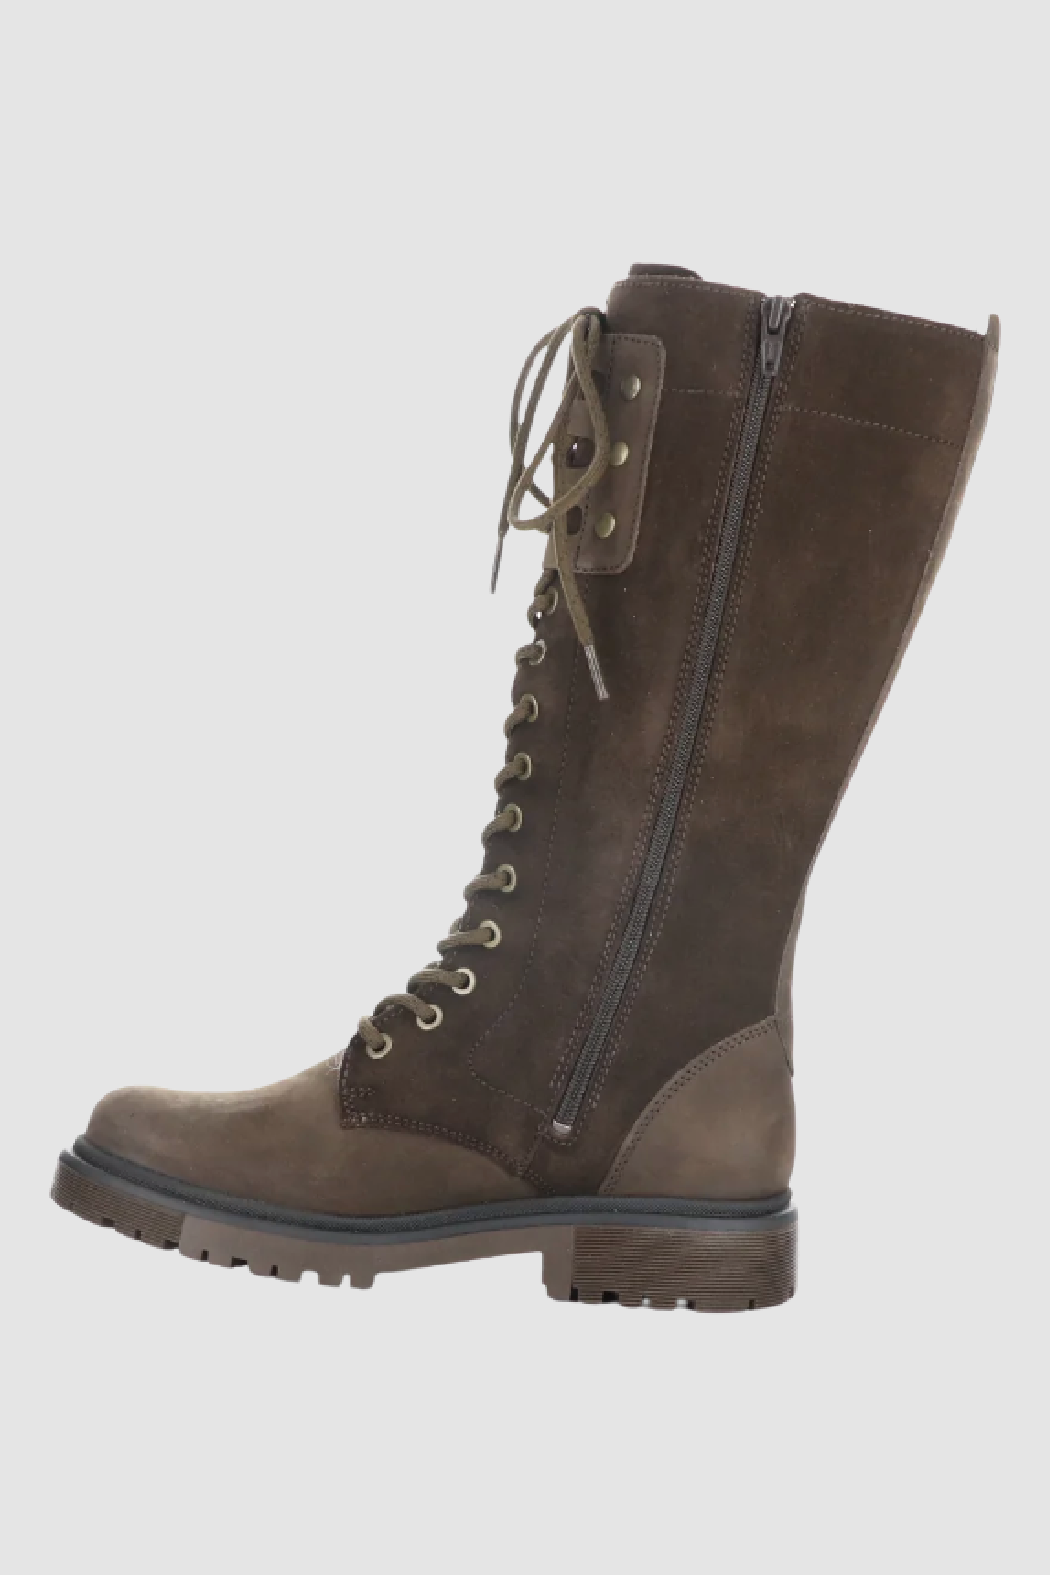 Axe Lace Up Tall Boot